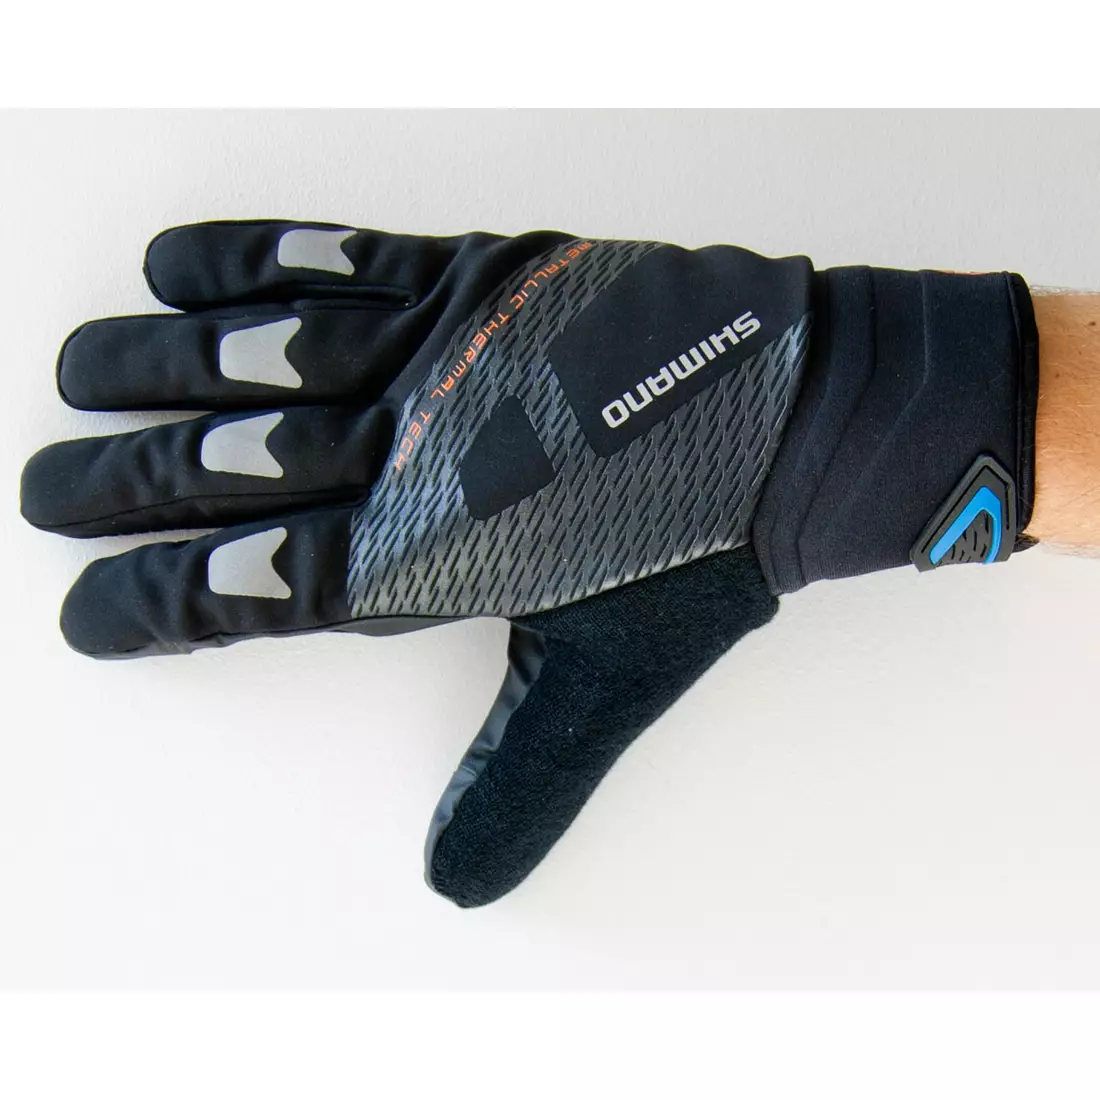 SHIMANO WINDSTOPPER winter cycling gloves, black ECWGLBWNS25ML